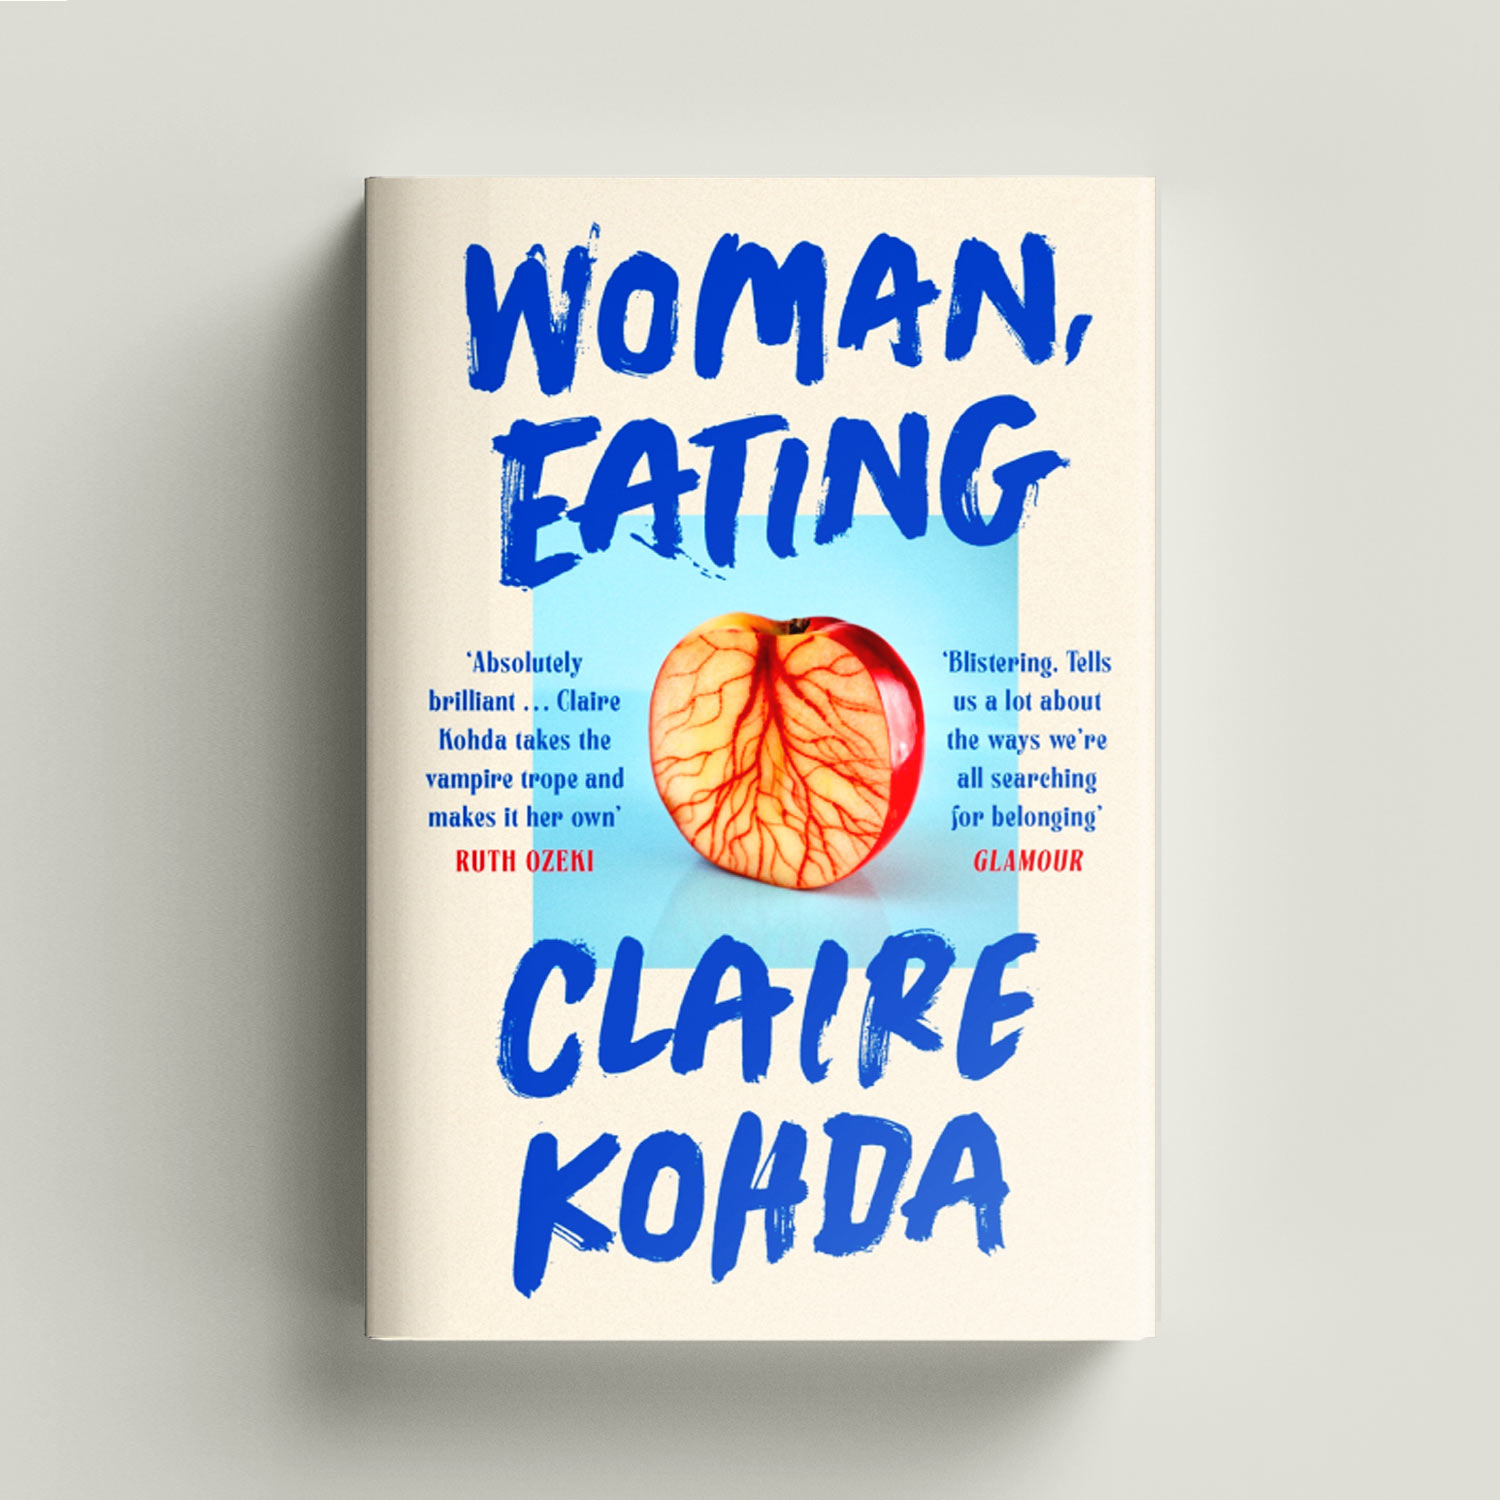 Woman Eating by Clare Kohda